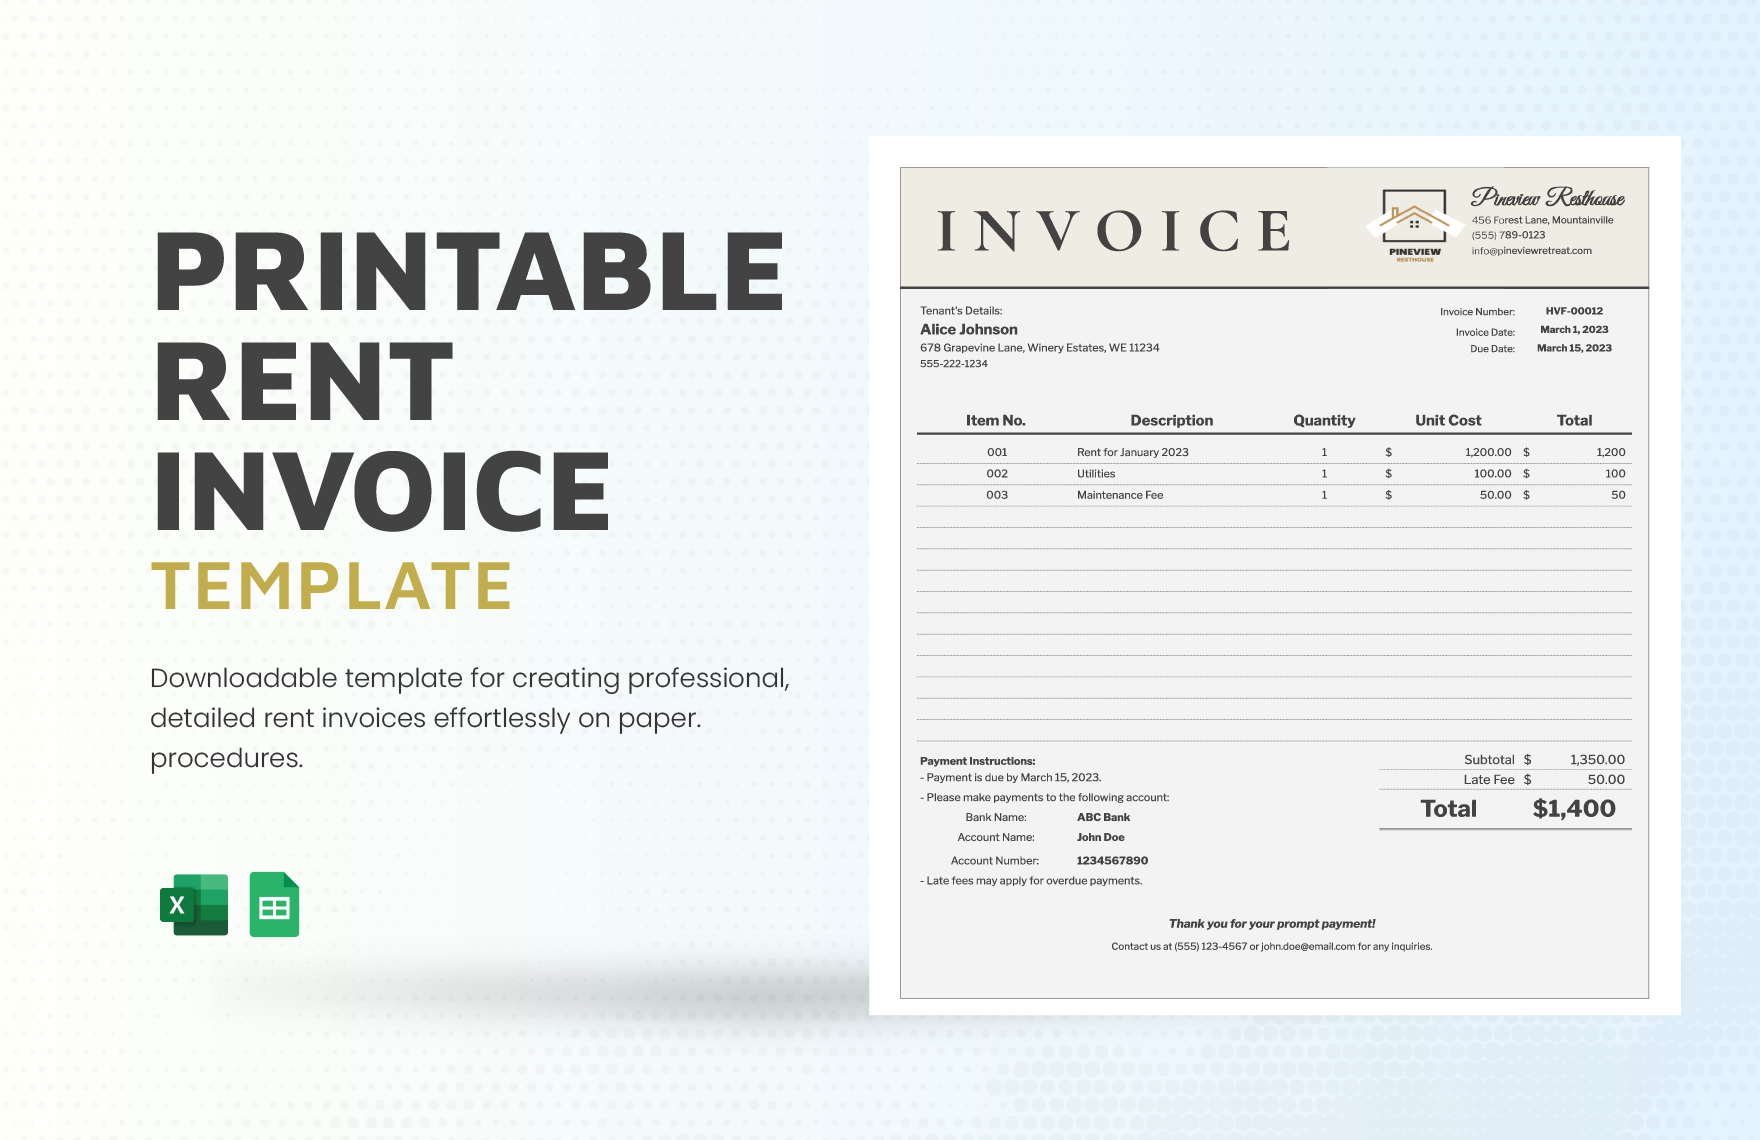 Printable Rent Invoice Template